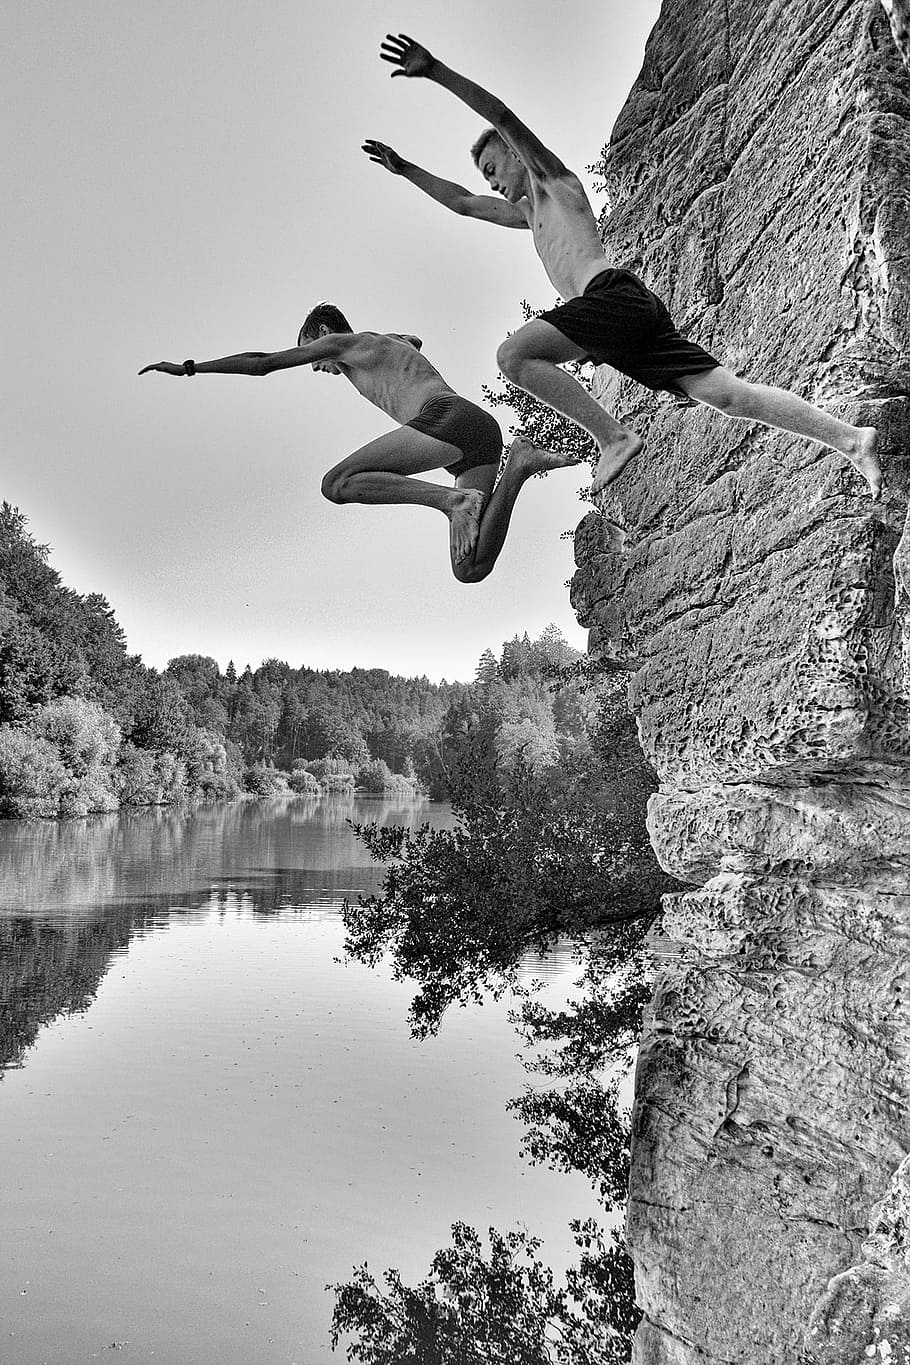 jumps into the pond, the pond věžák, boys, jumping, mid-air, tree, one person, people, adult, lake